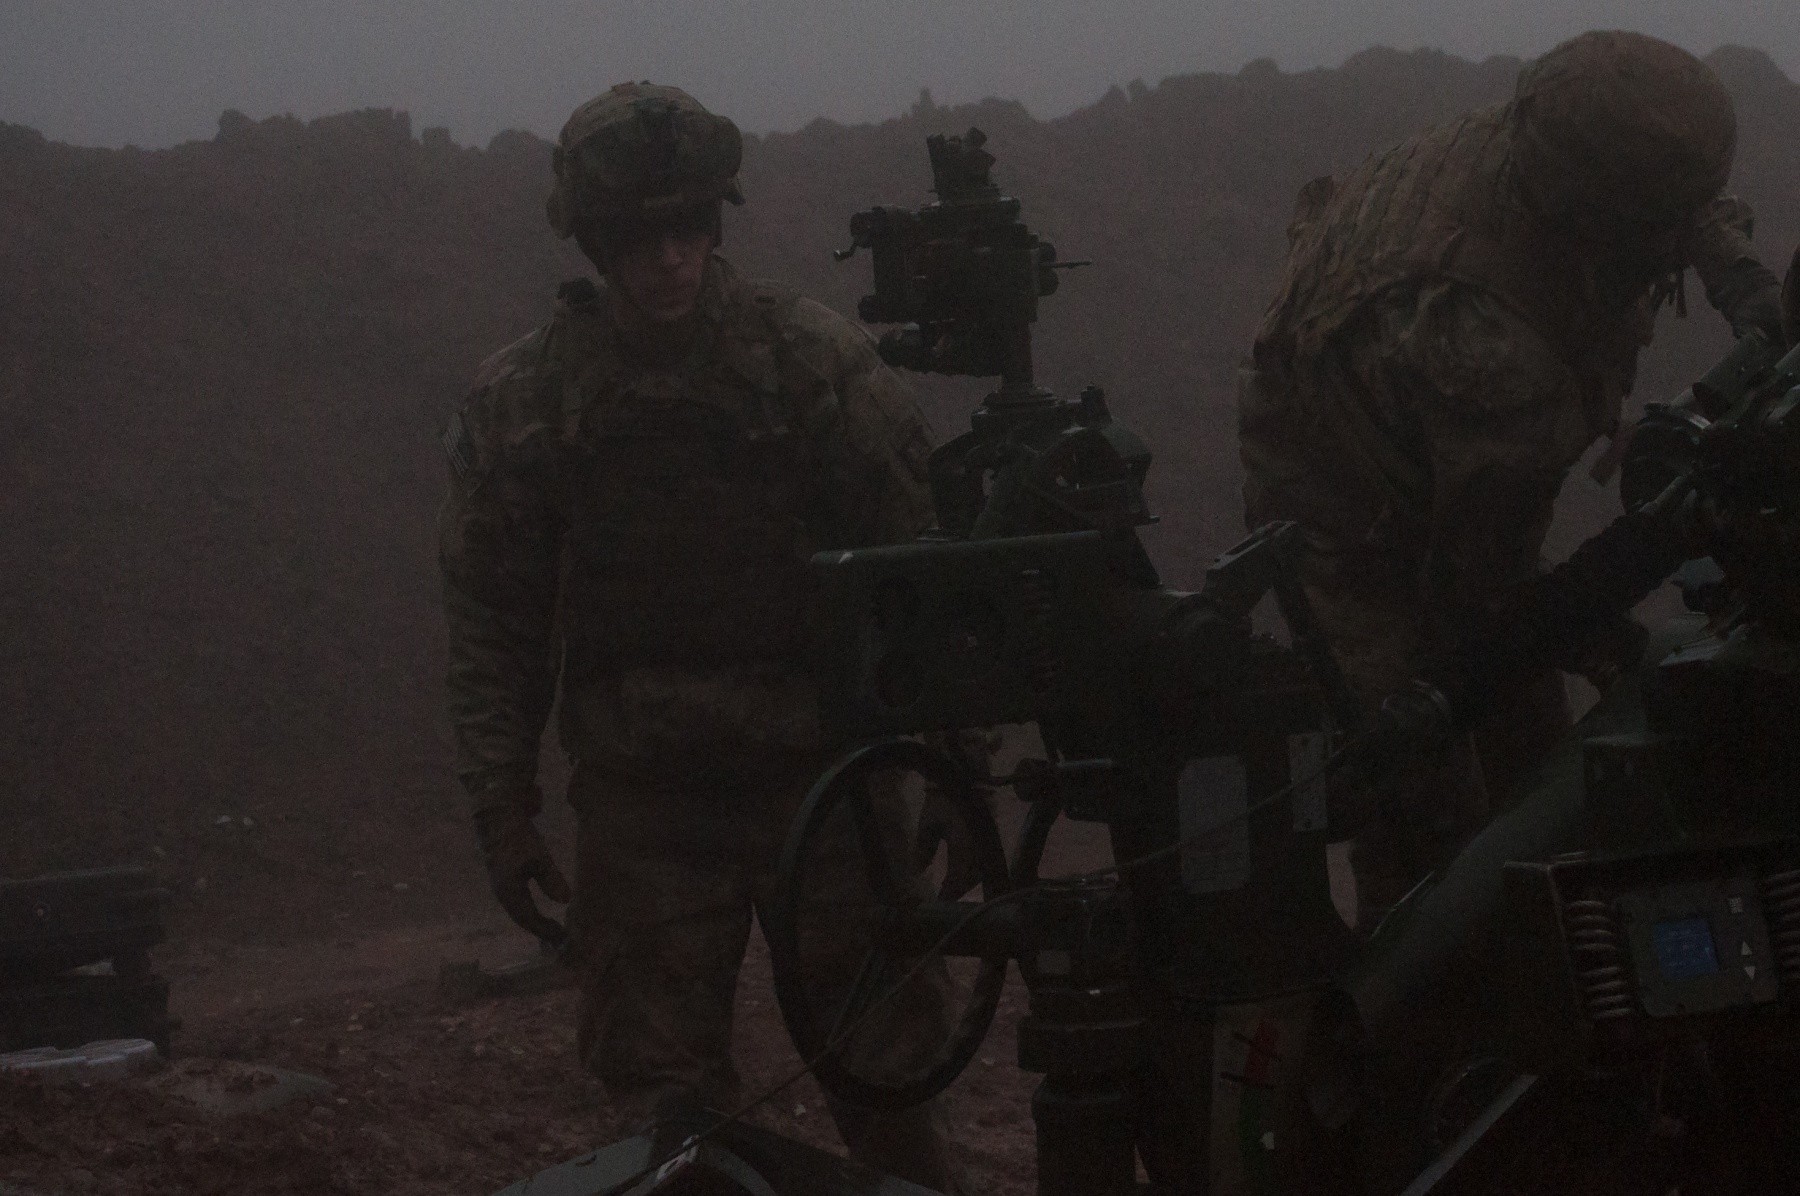 U.S. Army Sgt. Scott Martineau, Battery C, 1st Battalion, 320th Field Artillery Regiment, Task Force Strike, moves towards his position on an M777 howitzer during a fire mission to support the security forces during the Mosul counteroffensive, Dec. 25, 2016, in northern Iraq. Battery C is supporting the ISF with indirect fires in their fight against ISIL. (Photo Credit: 1st Lt. Daniel Johnson)